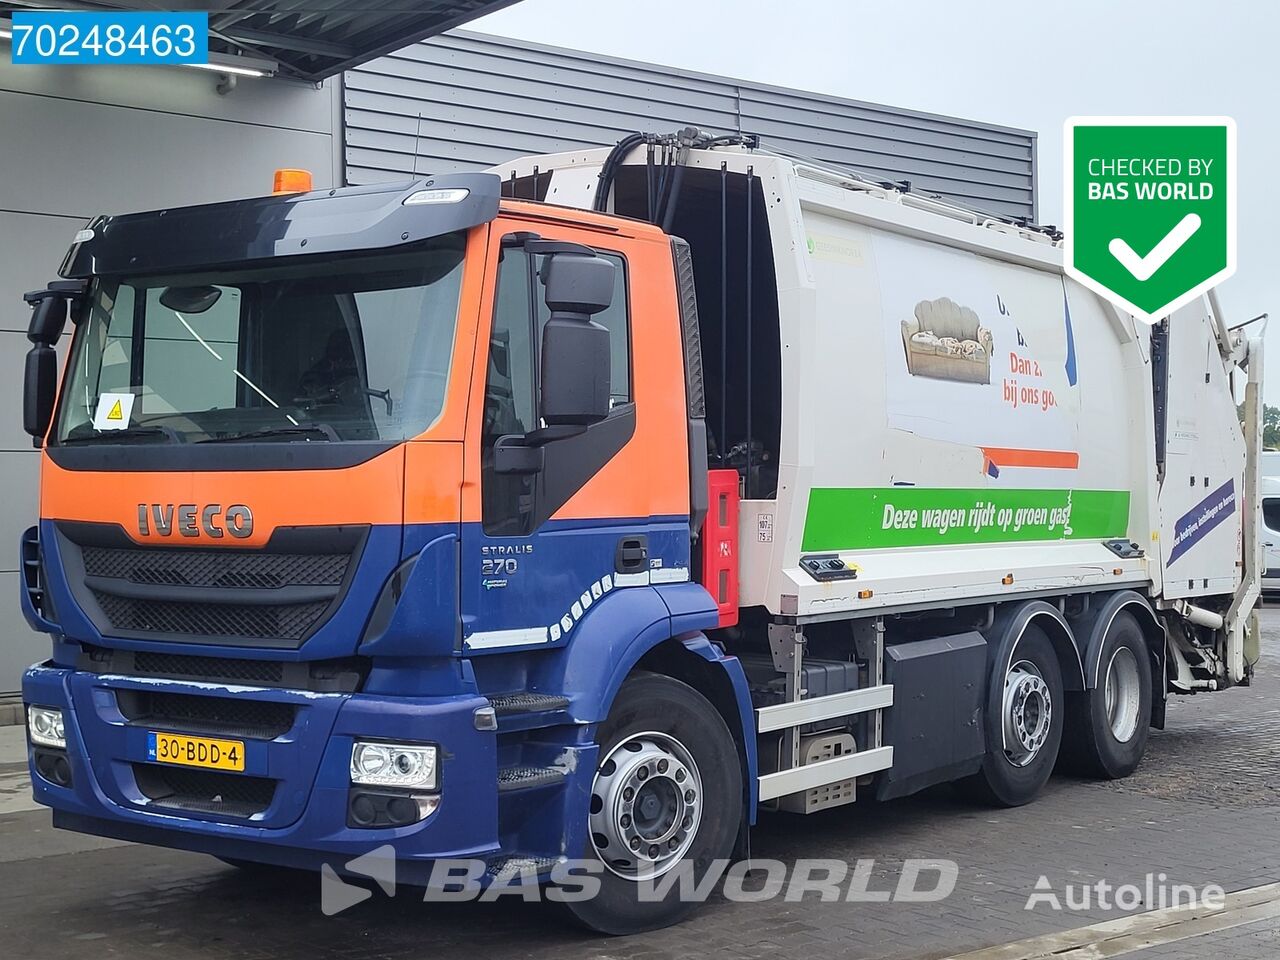 IVECO Stralis 270 6X2 NL-Truck CNG Geesink GPM III v 20H25 Retarder Eu garbage truck